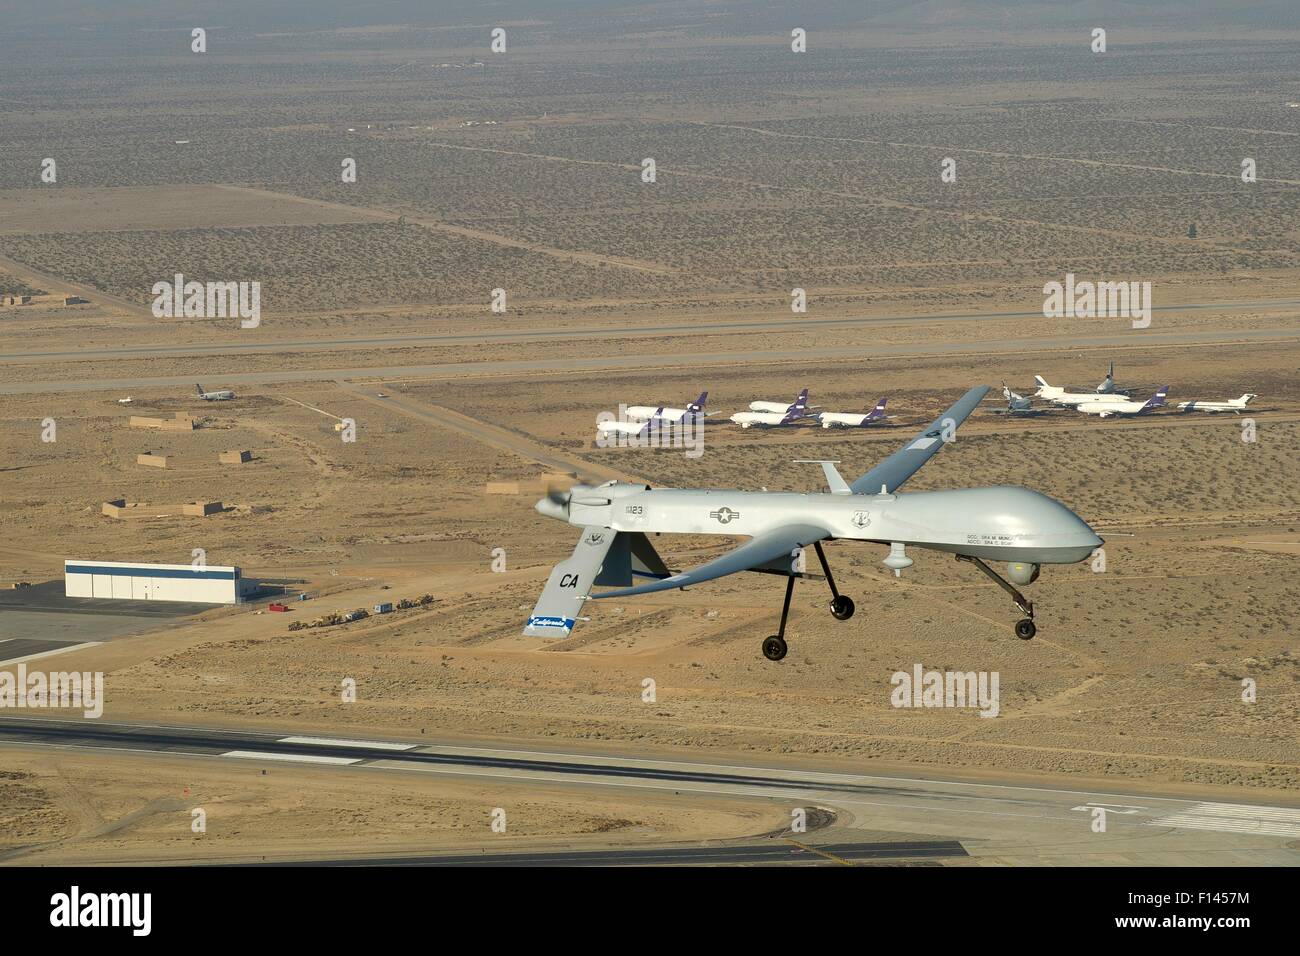 US Air Force MQ-1 Predator unmanned aerial vehicle assigned to the California Air National Guard's 163rd Reconnaissance Wing in flight over Southern California January 13, 2012 in Victorville, CA. Stock Photo